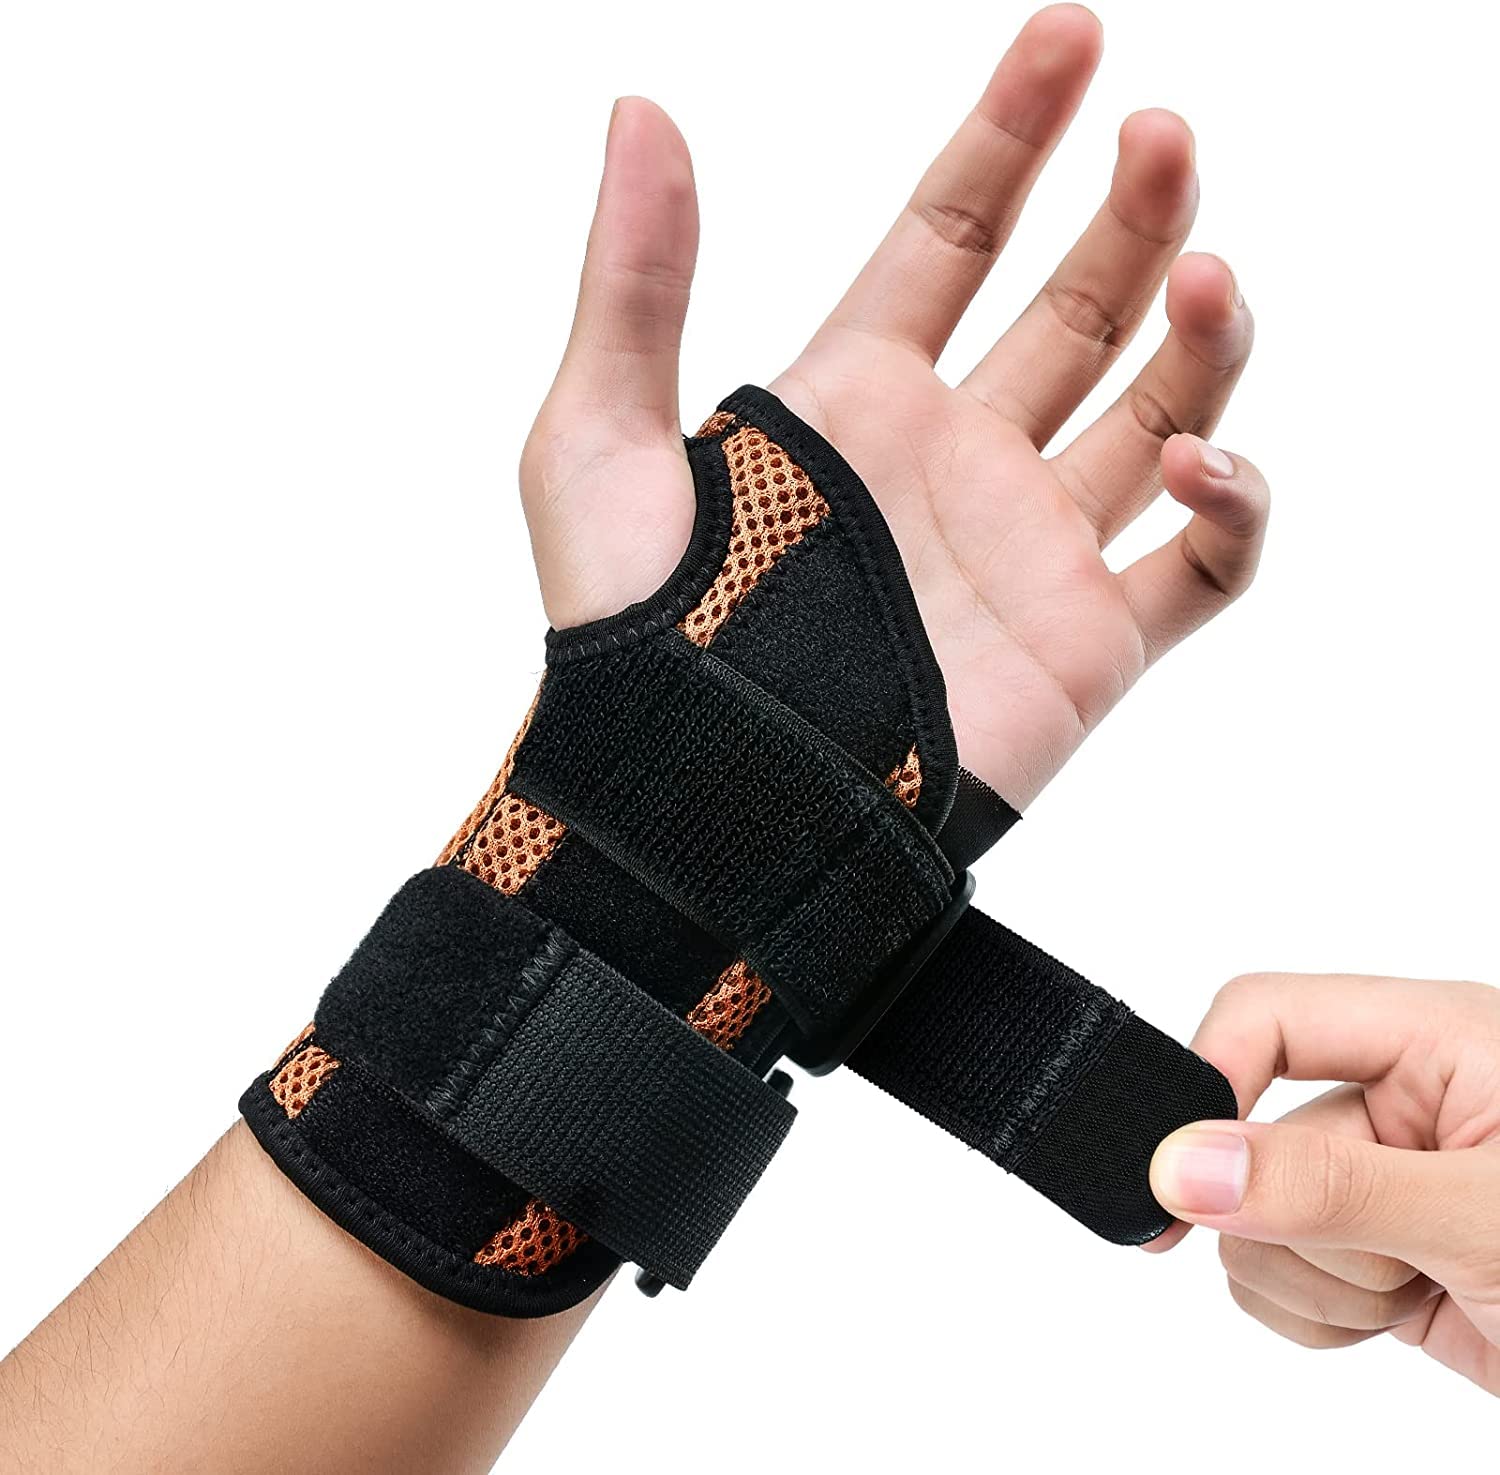 Carpal Tunnel Wrist Band For Men And Womenright Hand